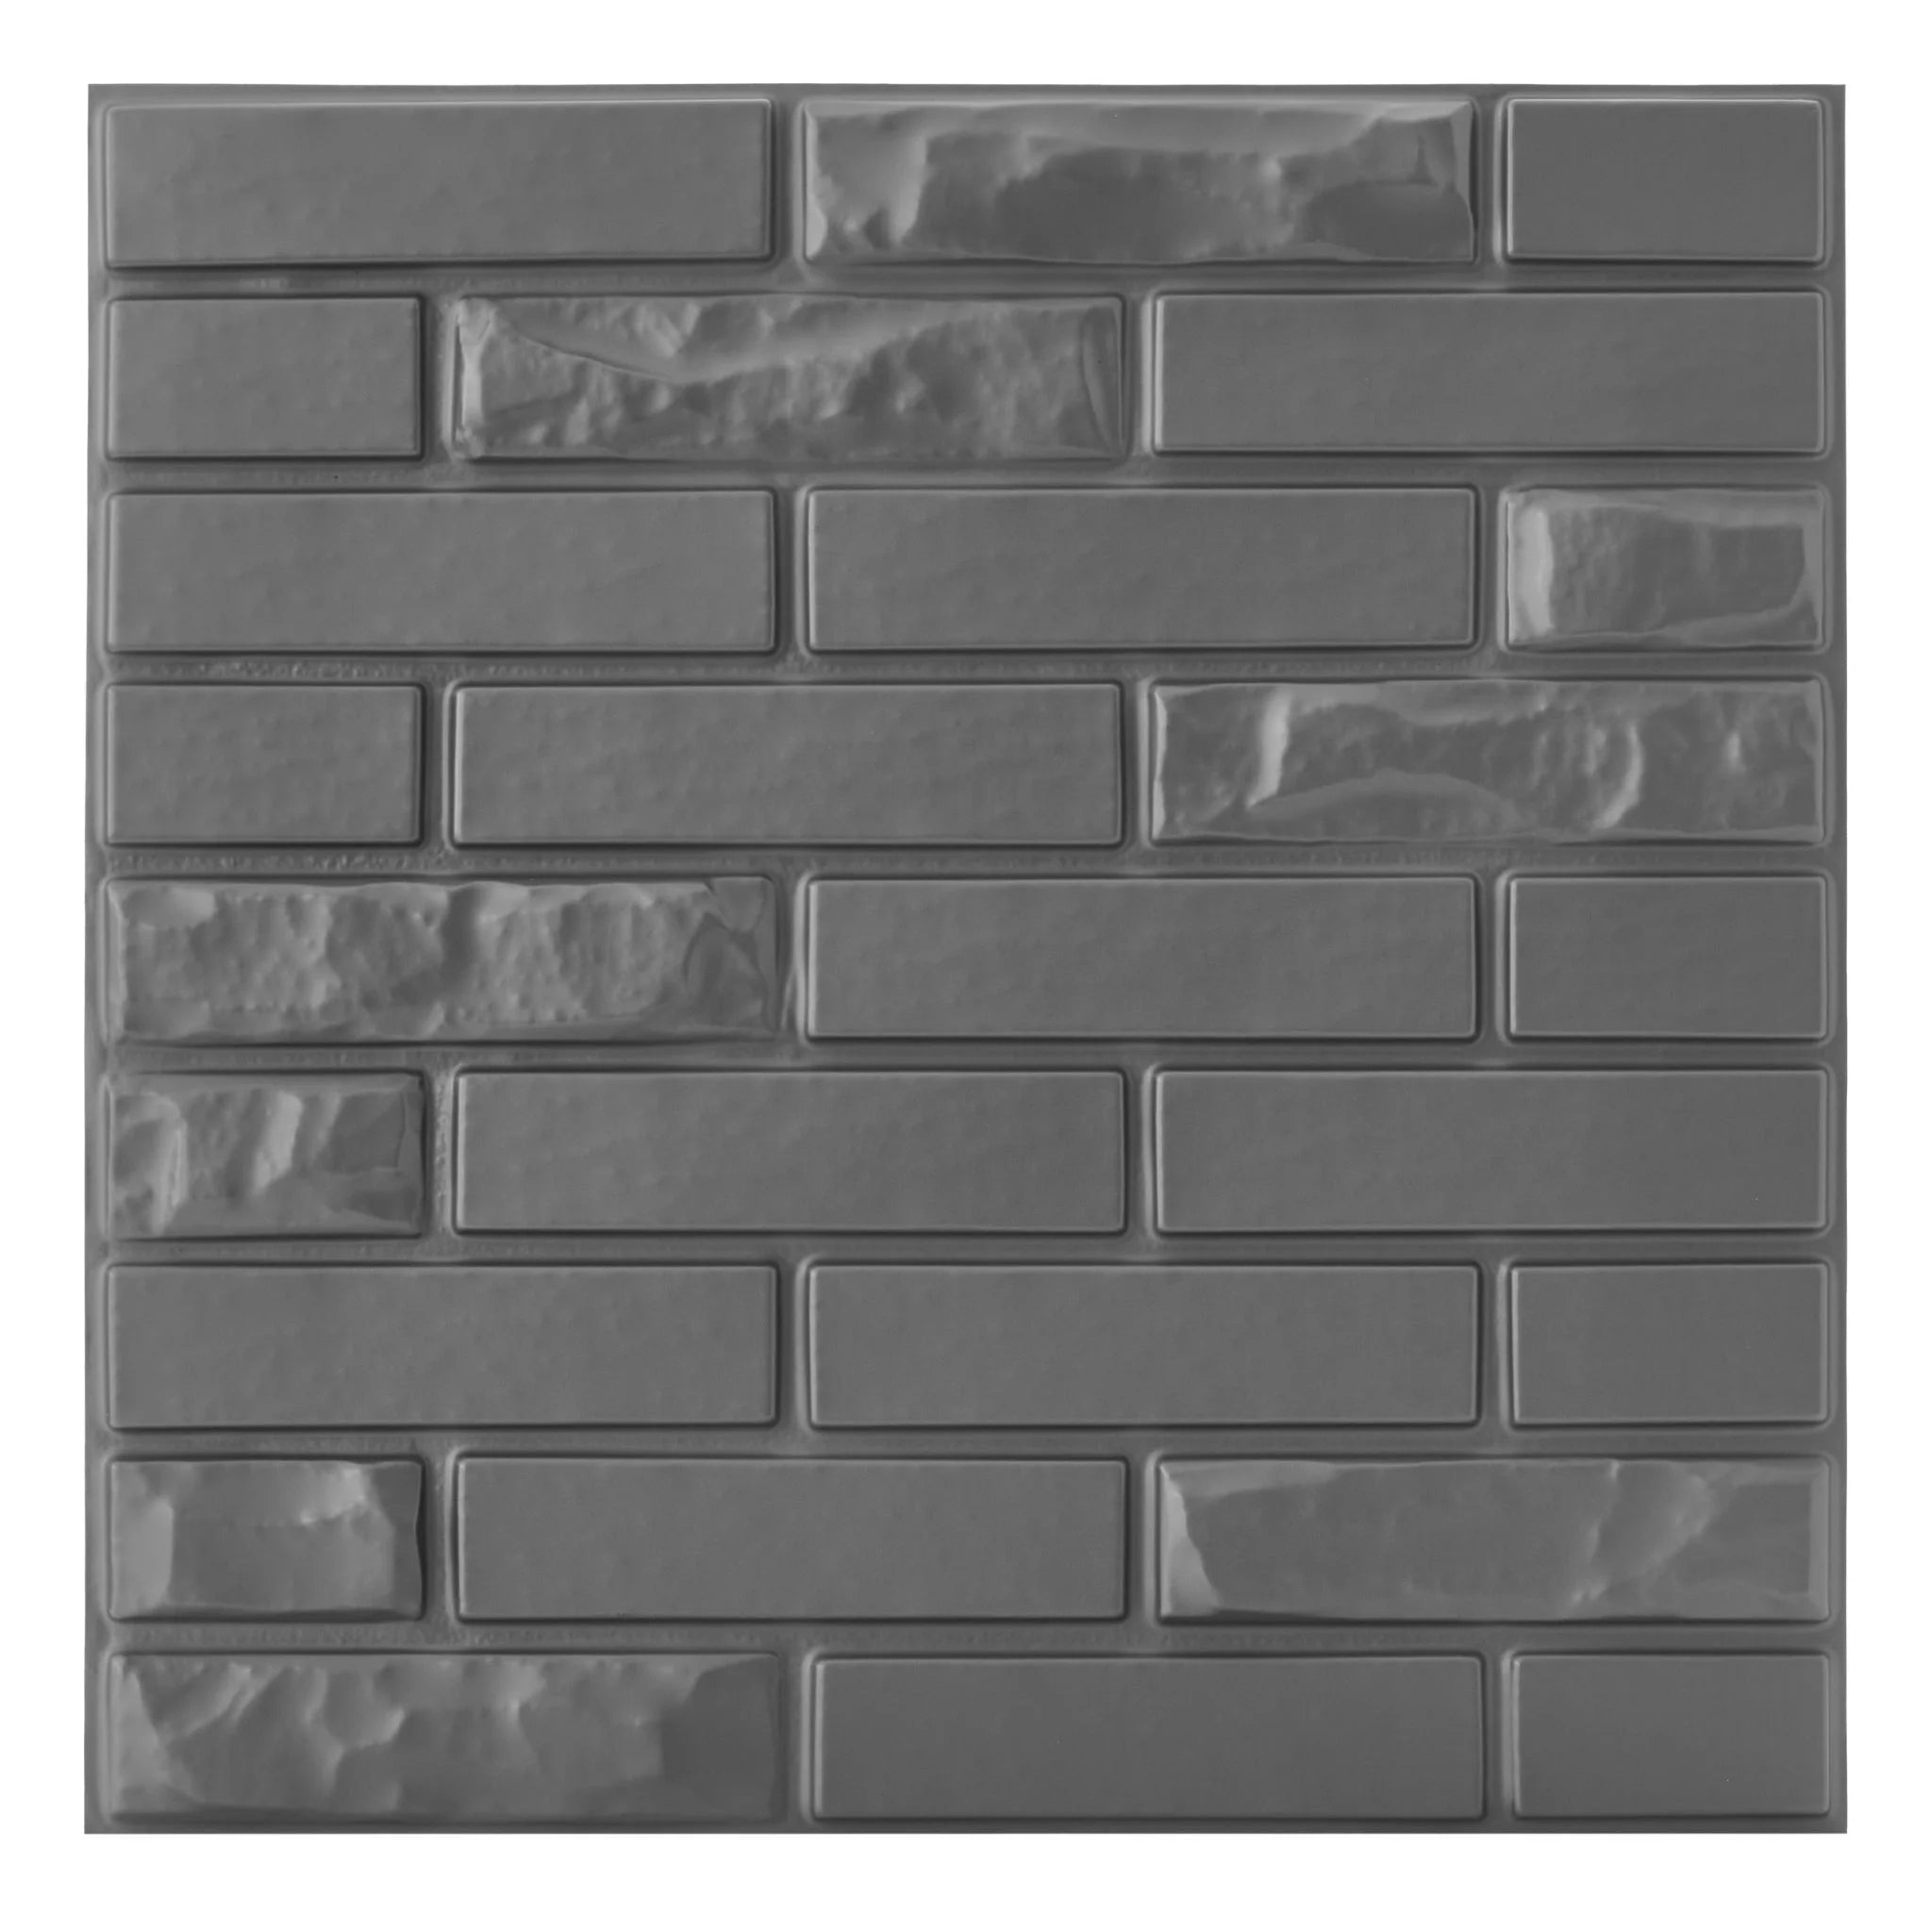 Silver PVC wall panel with brick patterns, close-up view